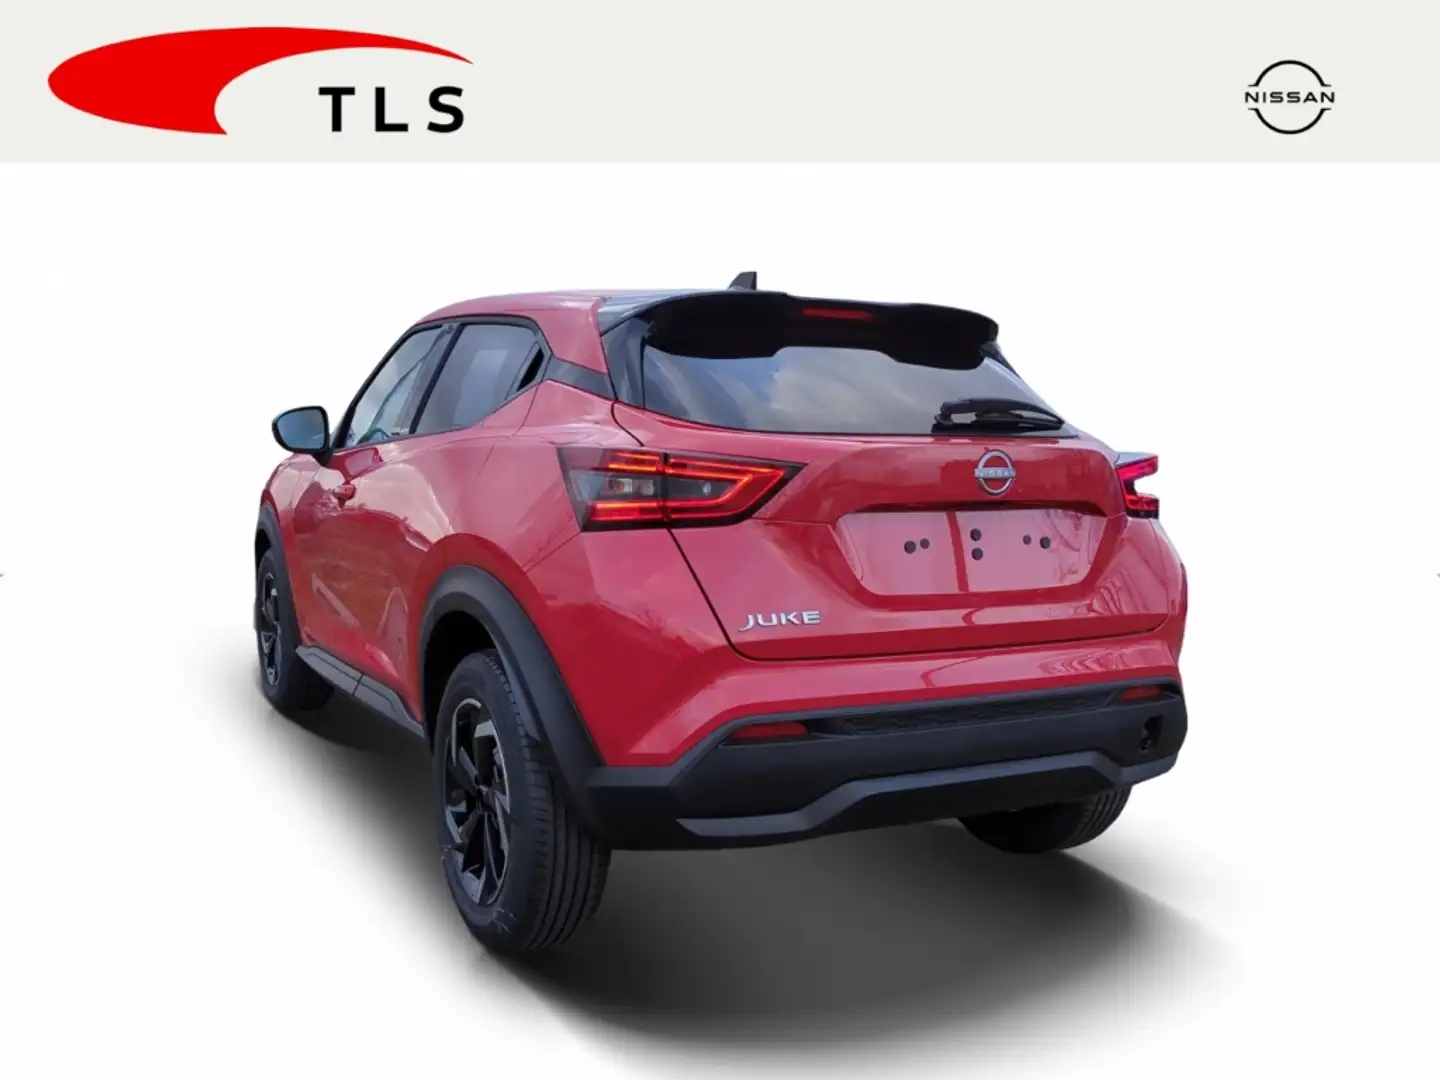 Nissan Juke N-STYLE - 1.0 DIG-T - 114PS - SOLID RED Rouge - 2